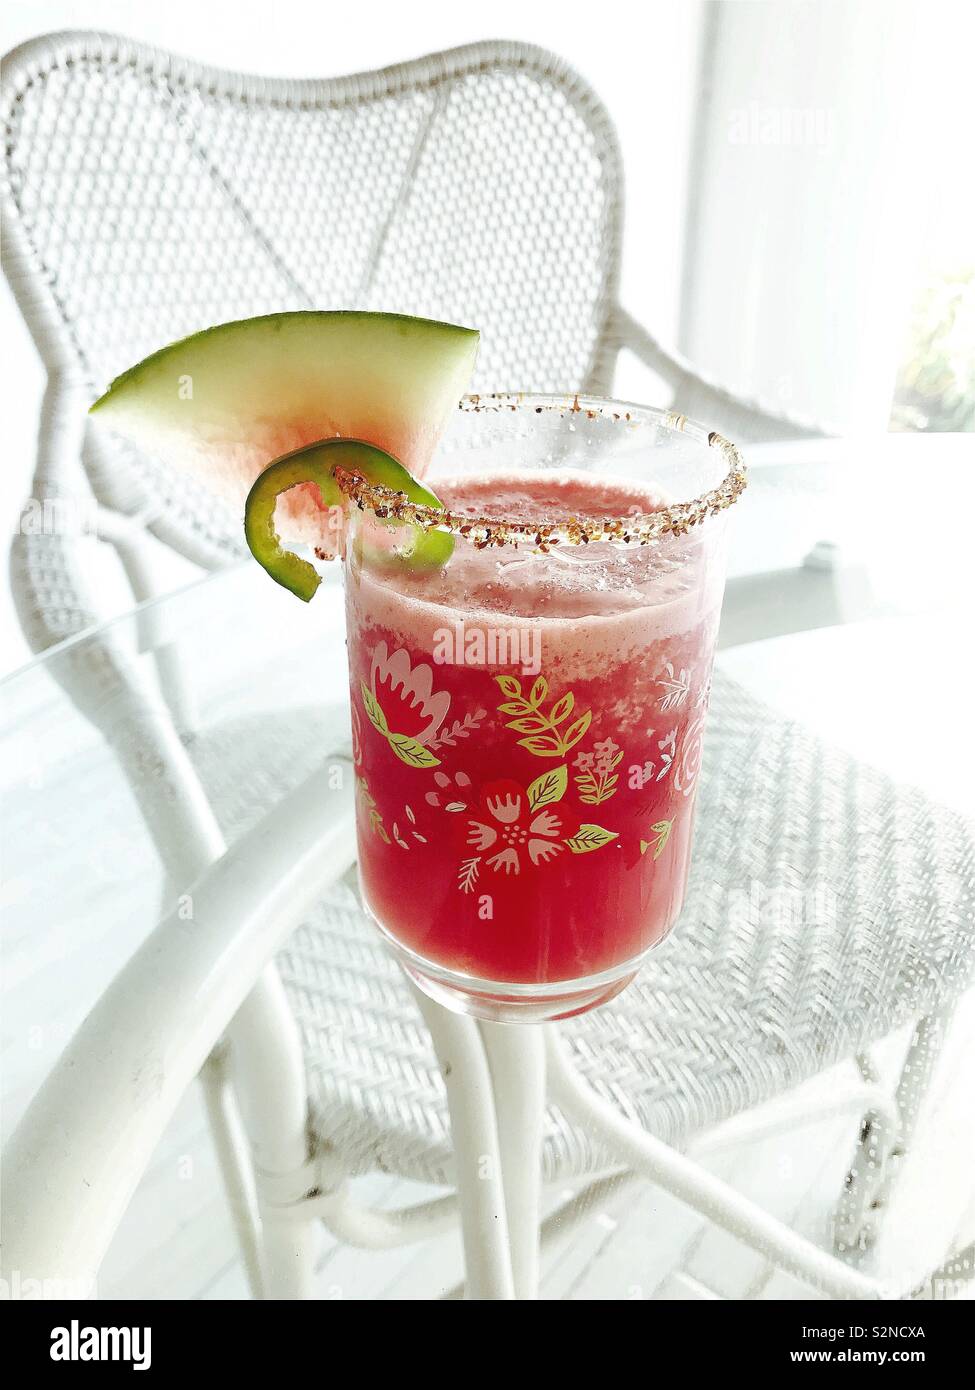 A spicy watermelon margarita in a floral retro glass is surrounded by a white wicker chair for a delicious summer beverage. Stock Photo